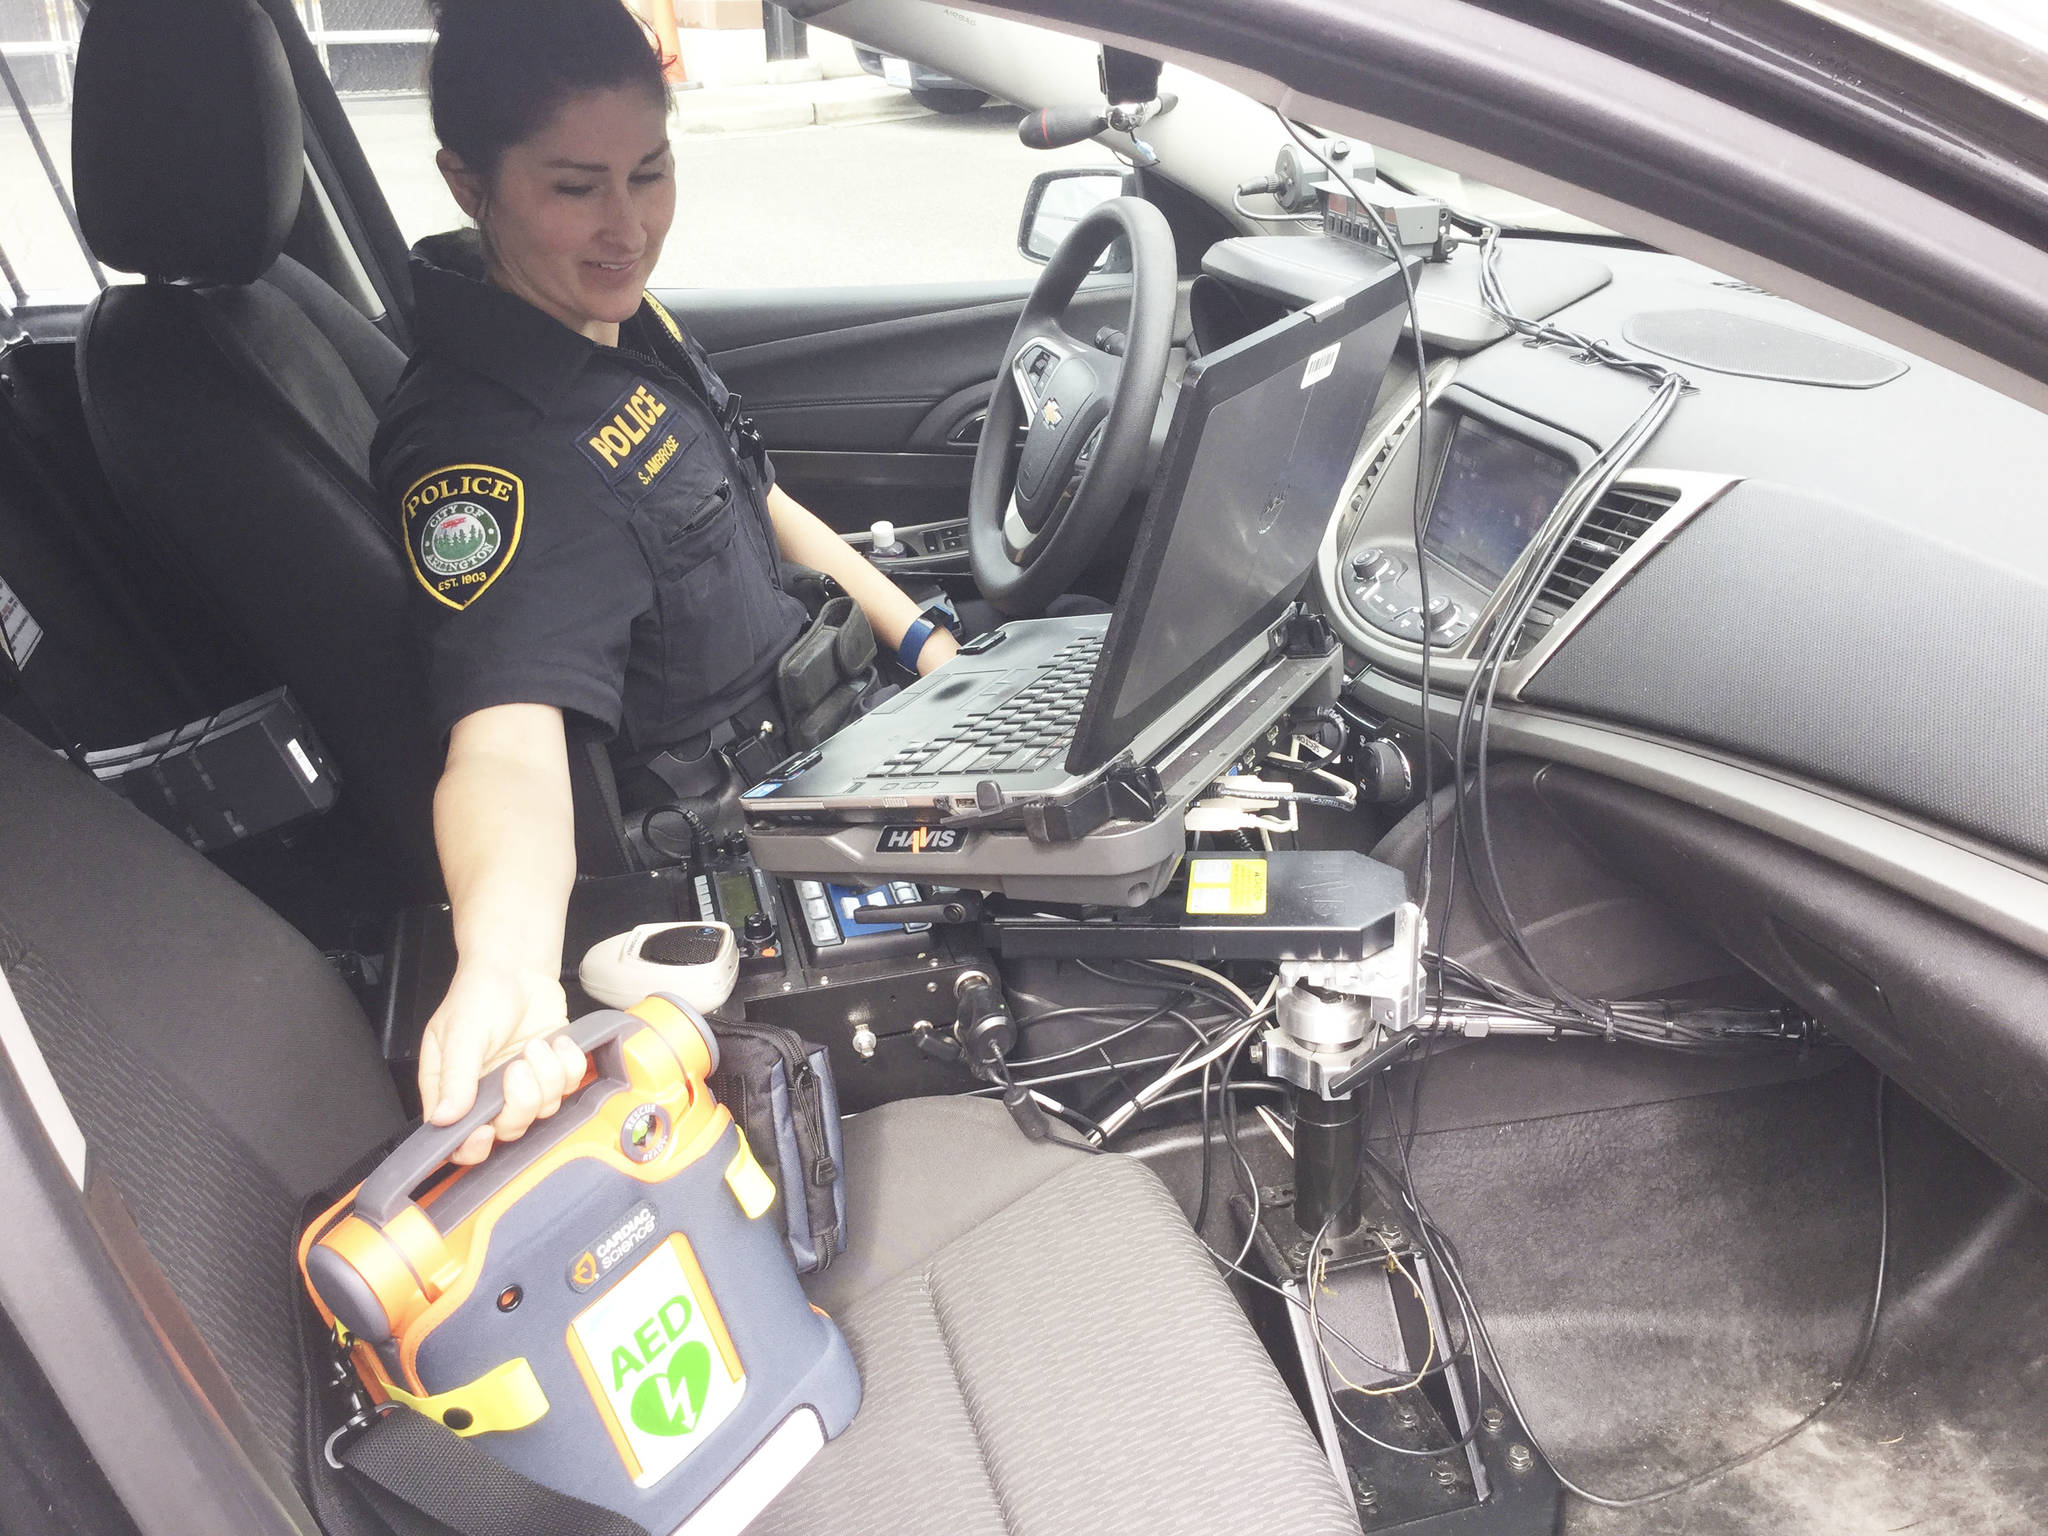 Arlington Police Officer Stephanie Ambrose displays one of the eight new automated external defibrillators (AEDs) that were donated to the department by the Arlington Rotary Club.